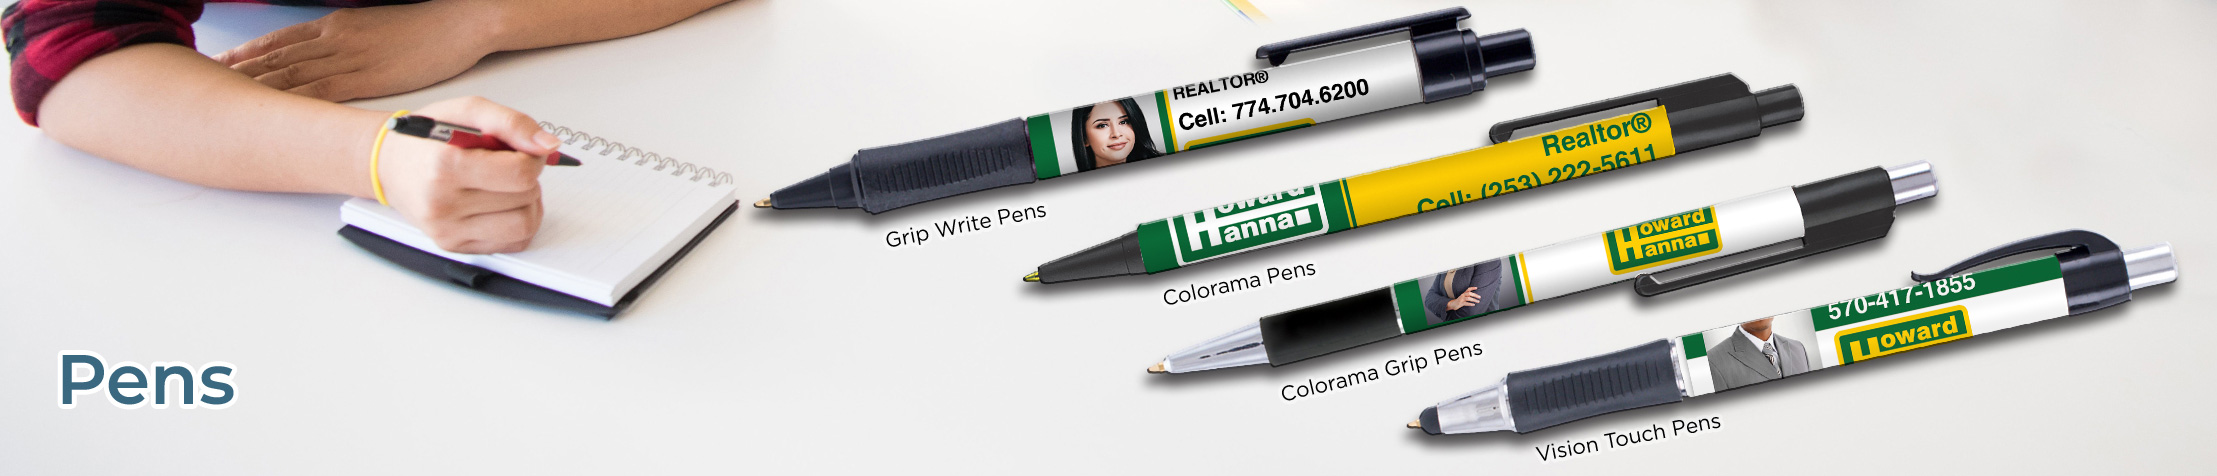 Howard Hanna Real Estate Personalized Pens - promotional products: Grip Write Pens, Colorama Pens, Vision Touch Pens, and Colorama Grip Pens | BestPrintBuy.com